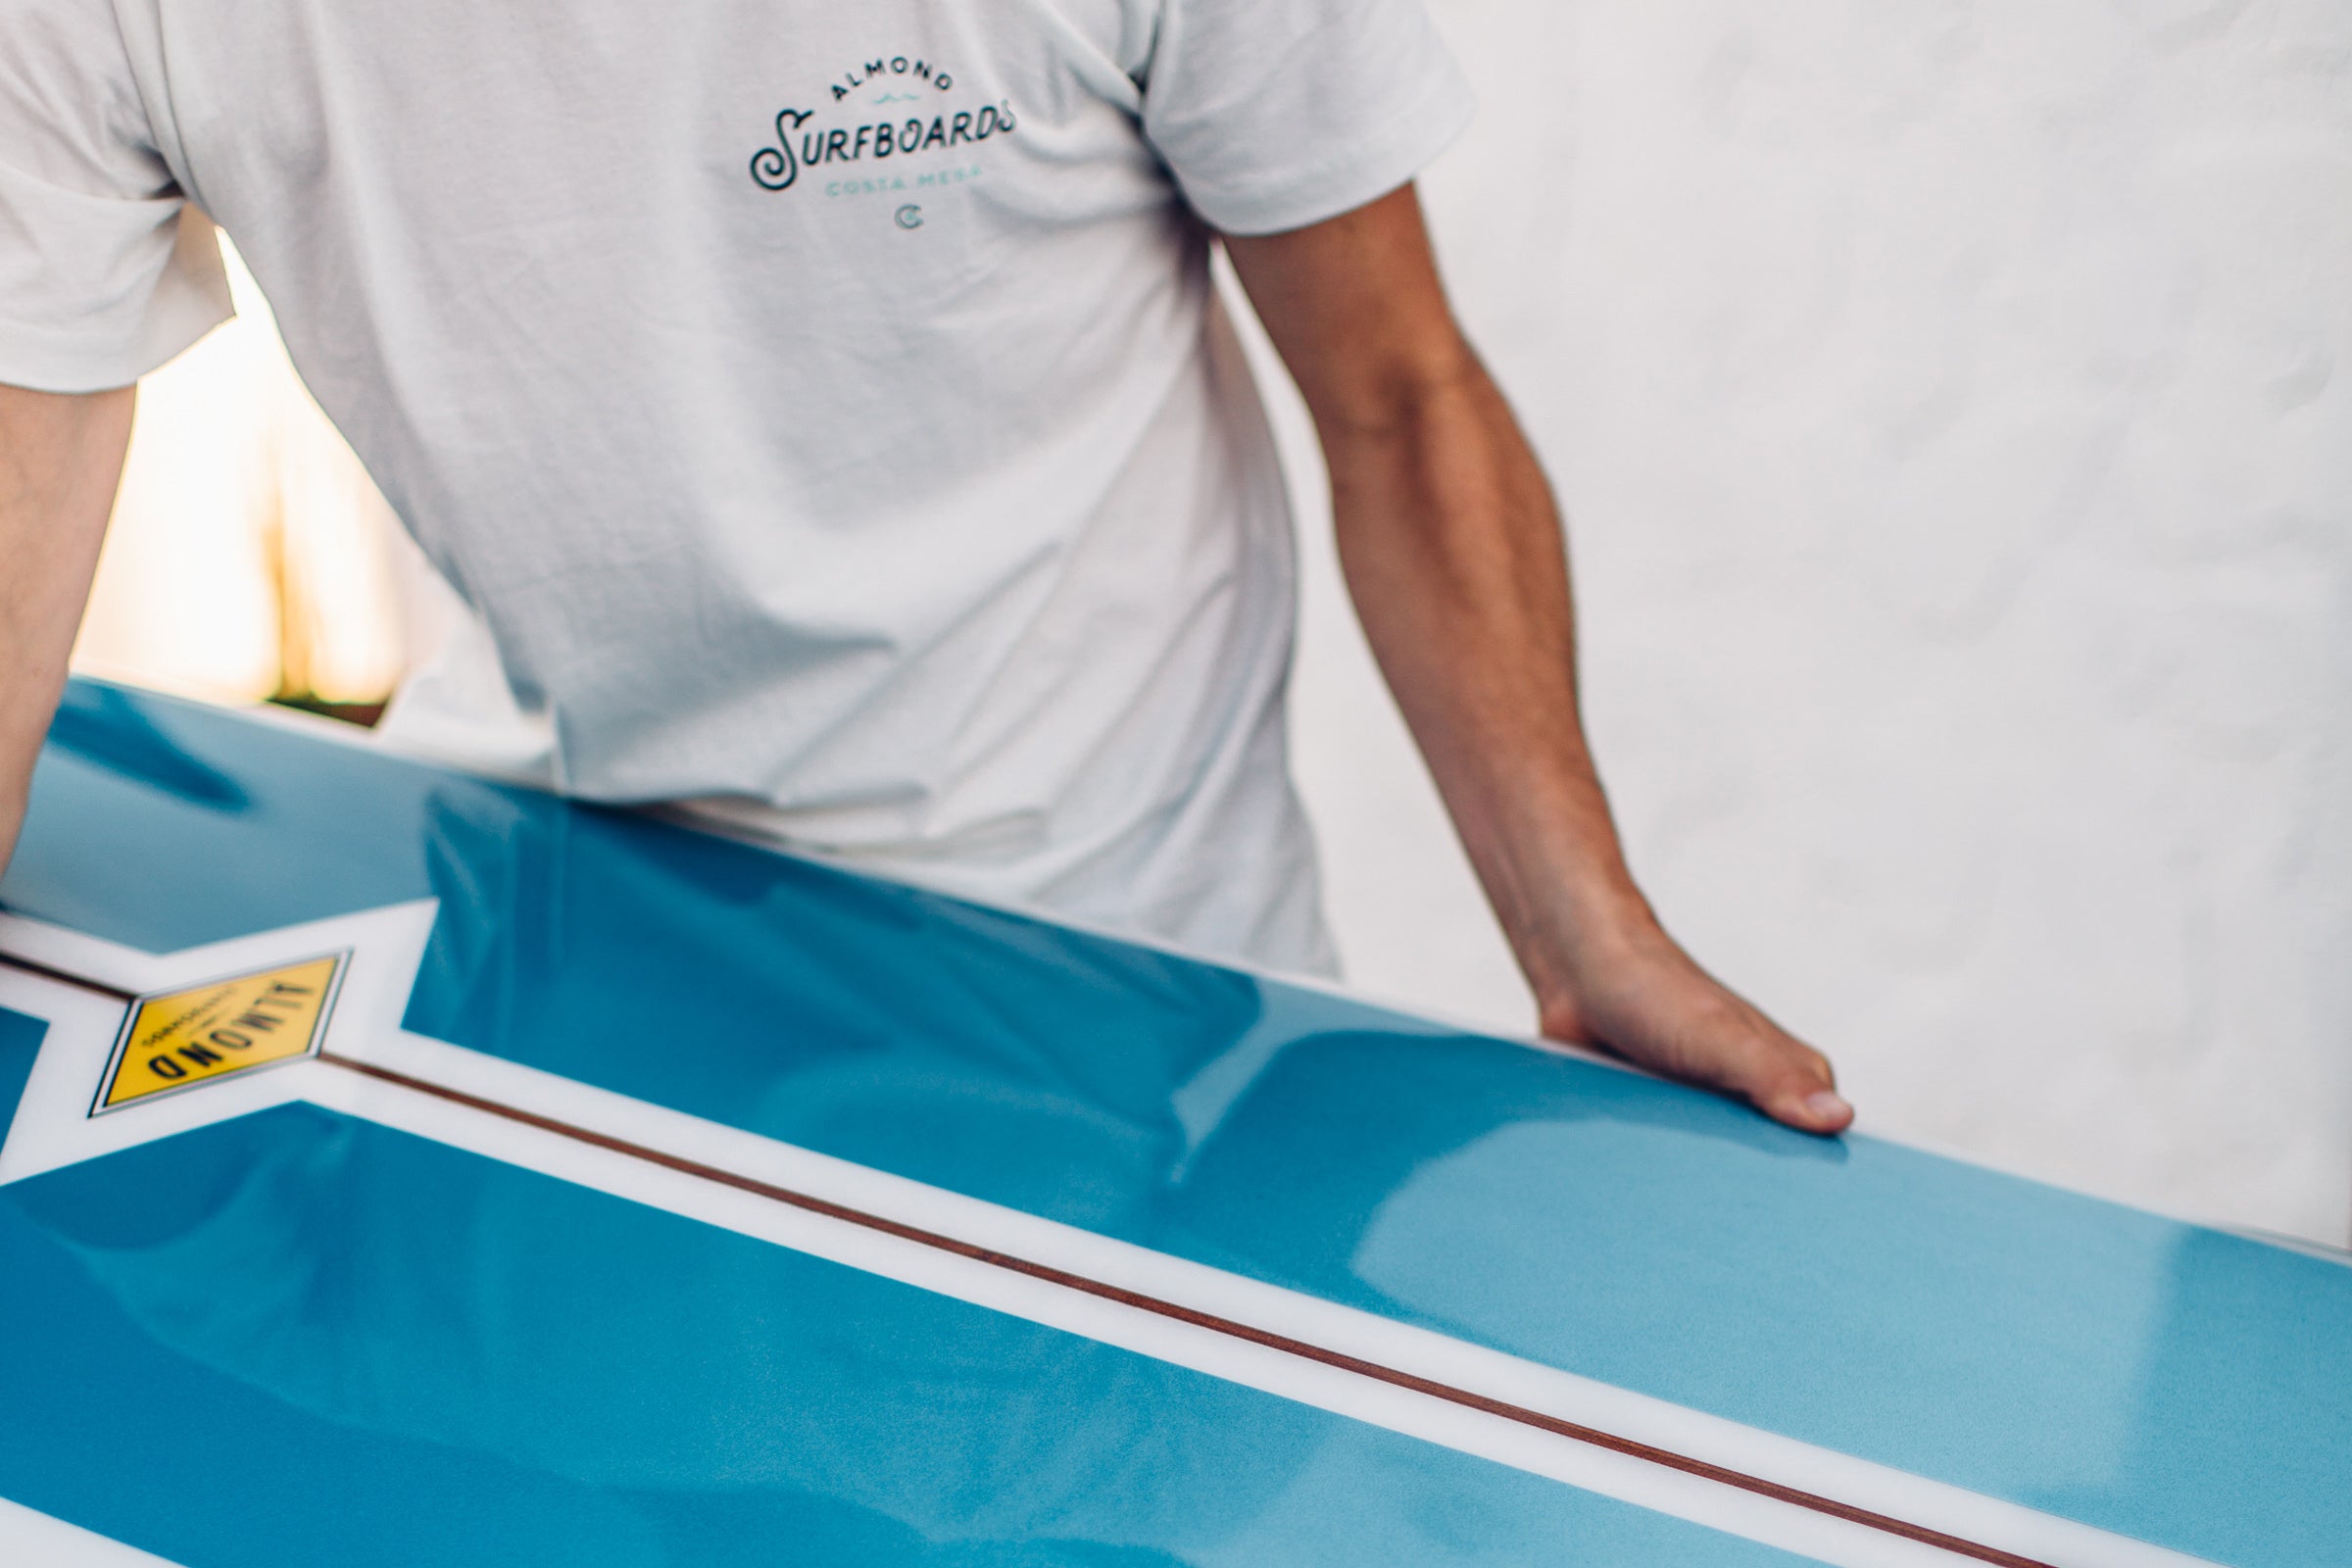 Want to Improve Your Surfing?